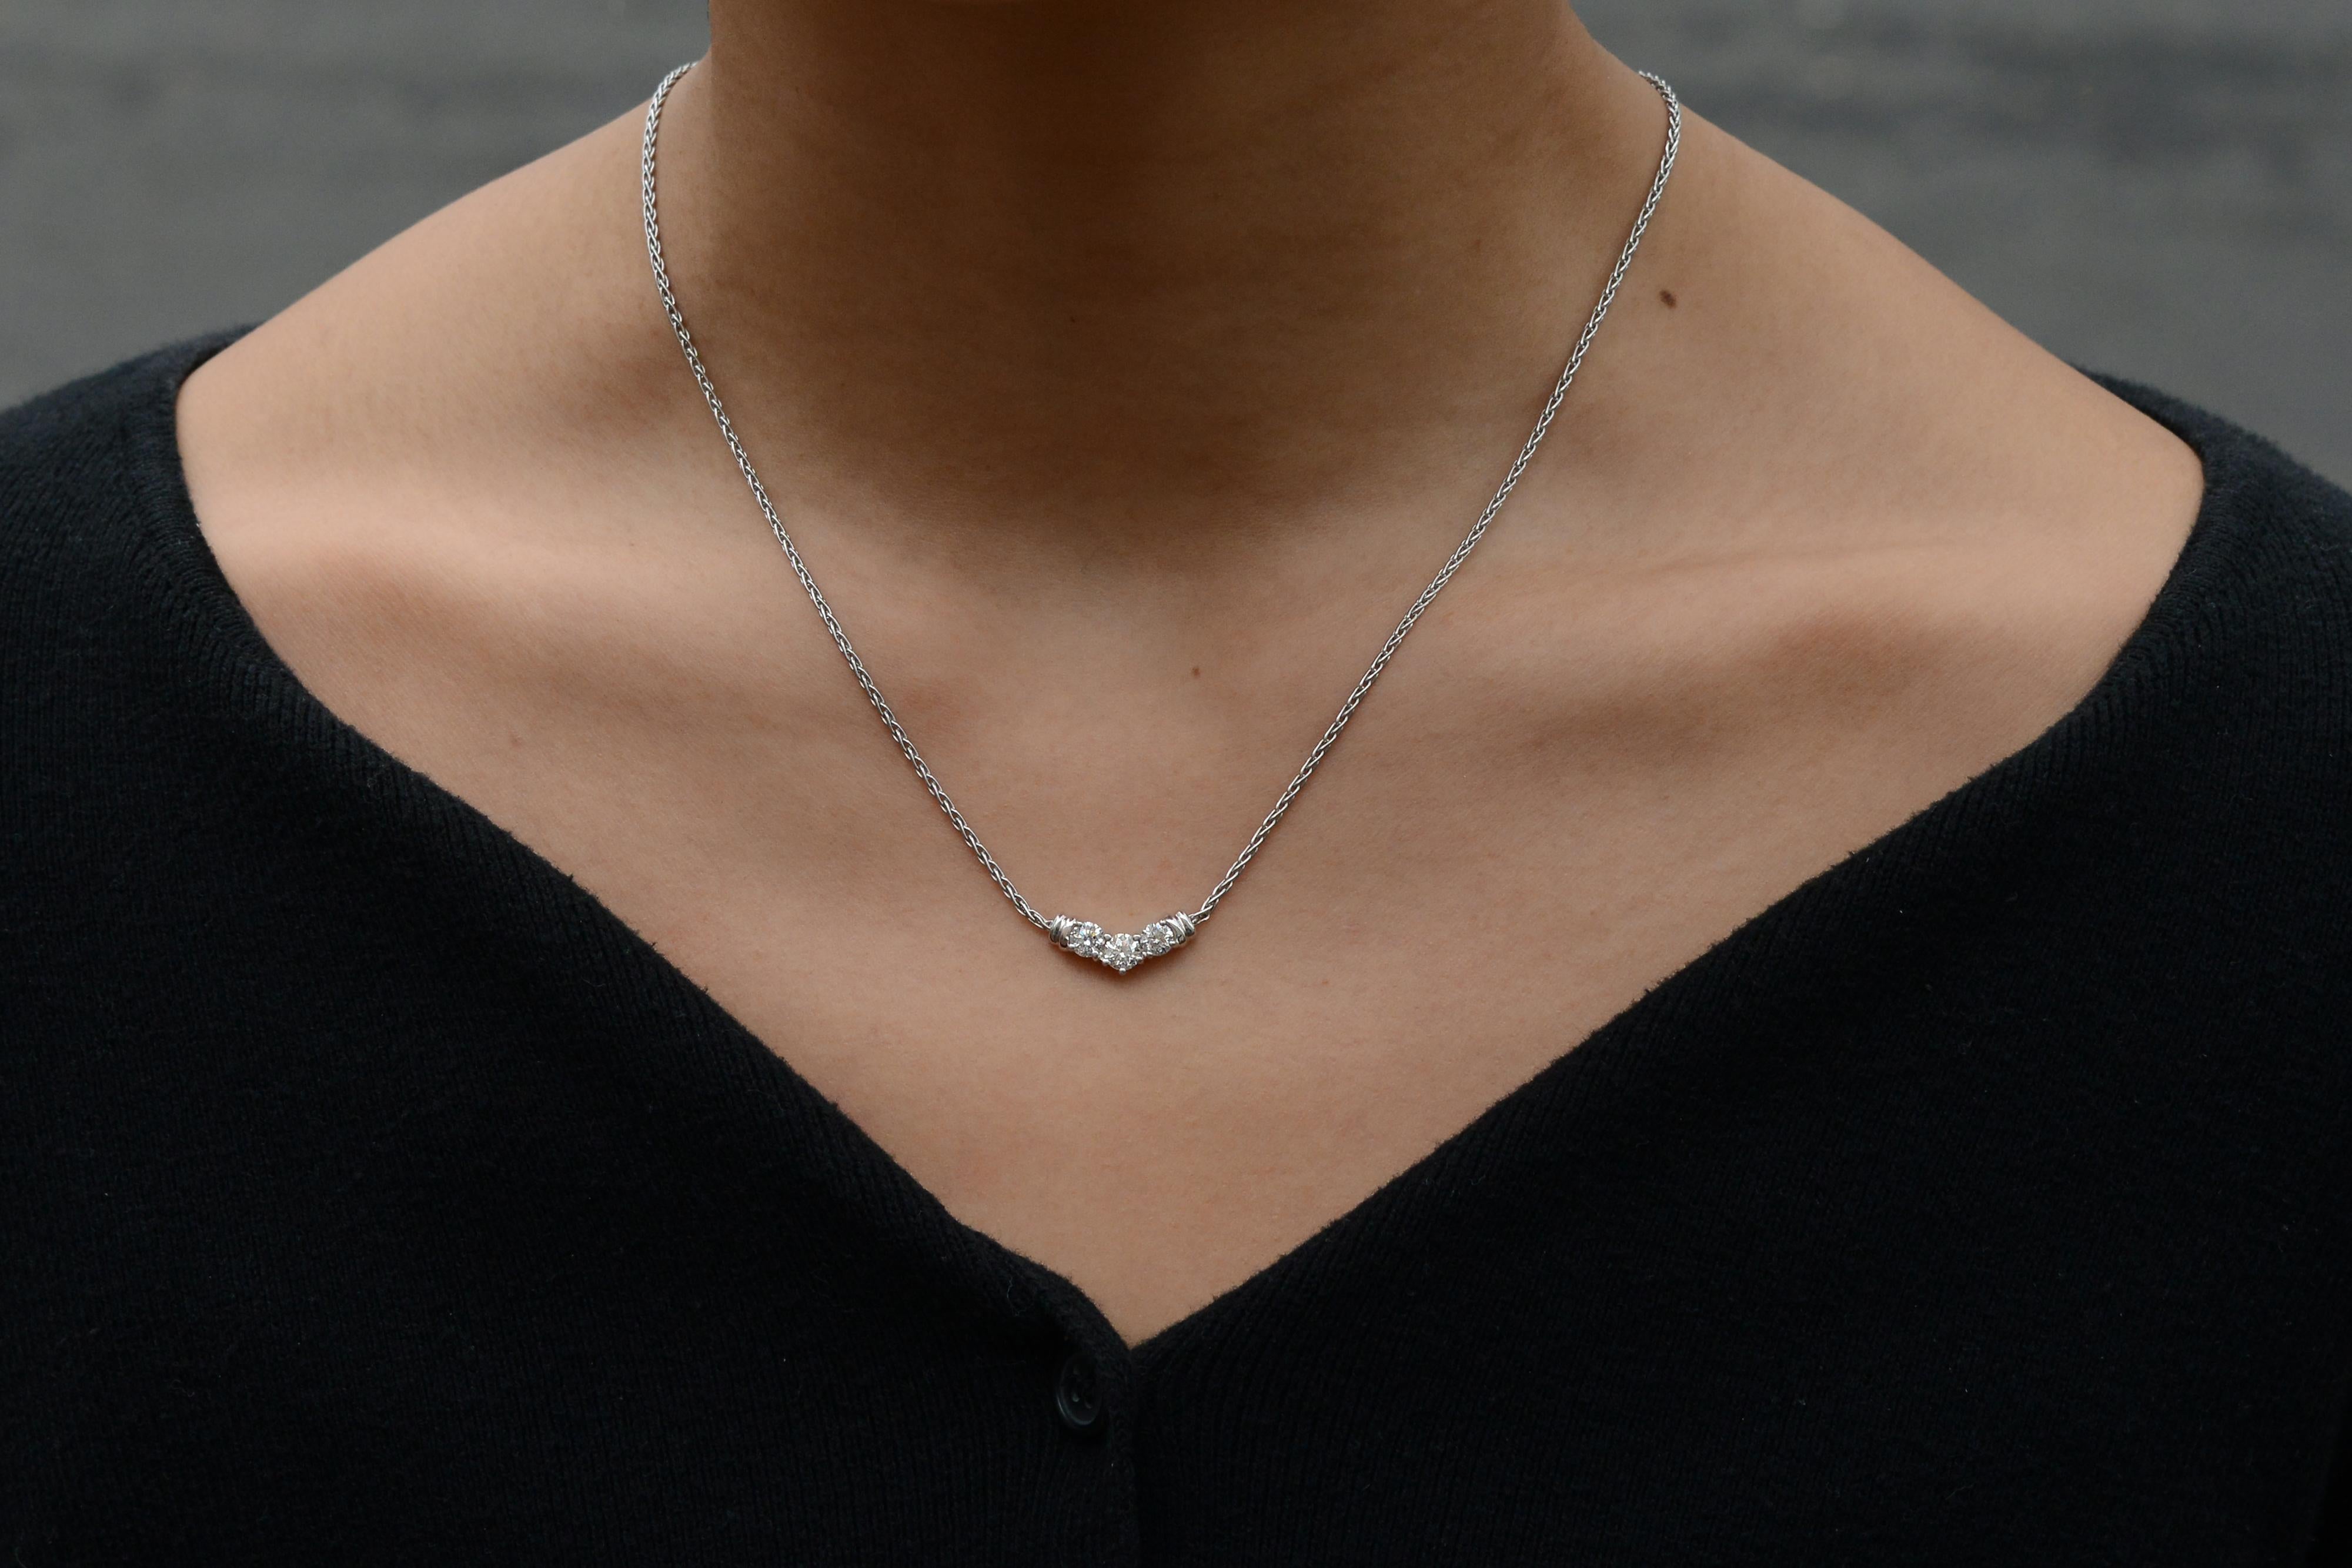 A vintage trilogy 3 stone diamond necklace. Made in the 1990s with a vintage aesthetic, this trinity necklace is crafted of sustainably-sourced 14 karat white gold, and is embellished with 3/4 carats of superior diamonds that sparkle and shine with